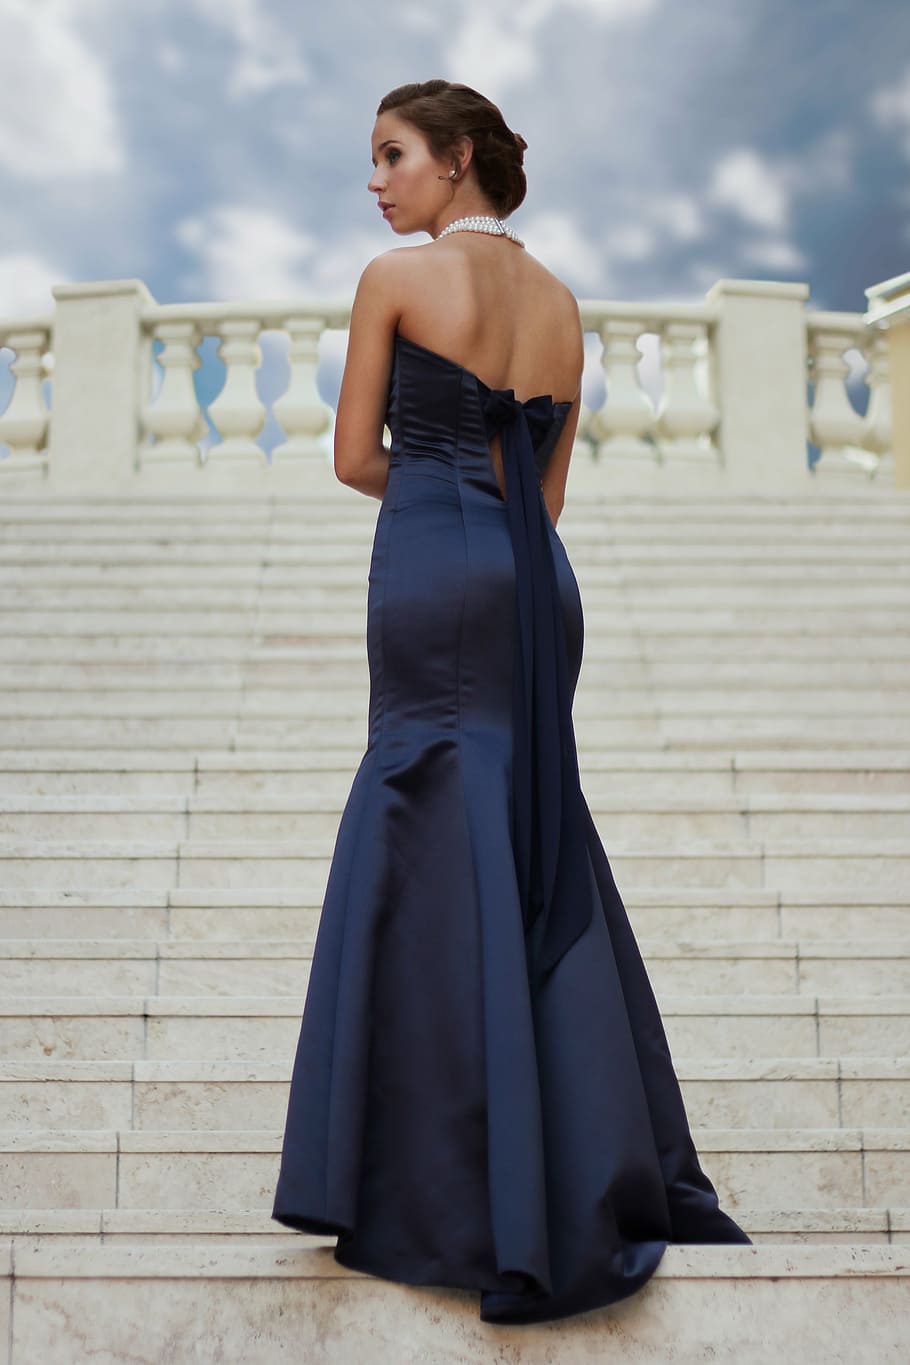 woman, wearing, strapless dress, standing, stairs, female, caucasian, person, girl, gown